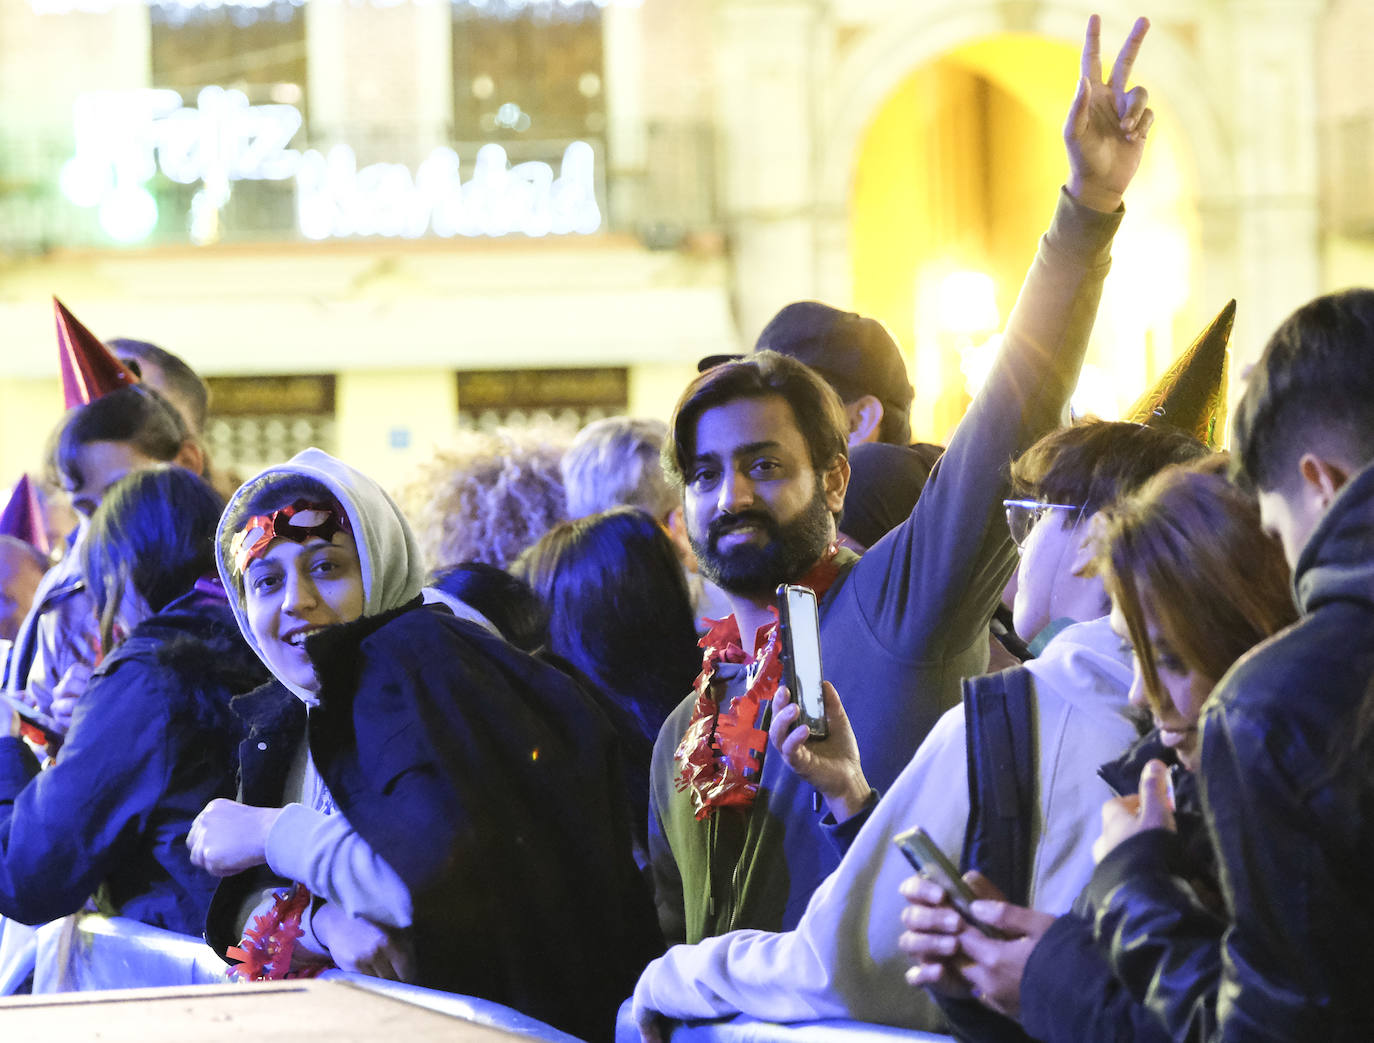 New Year's Eve celebrations in Malaga city attracted visitors from Spain and abroad.